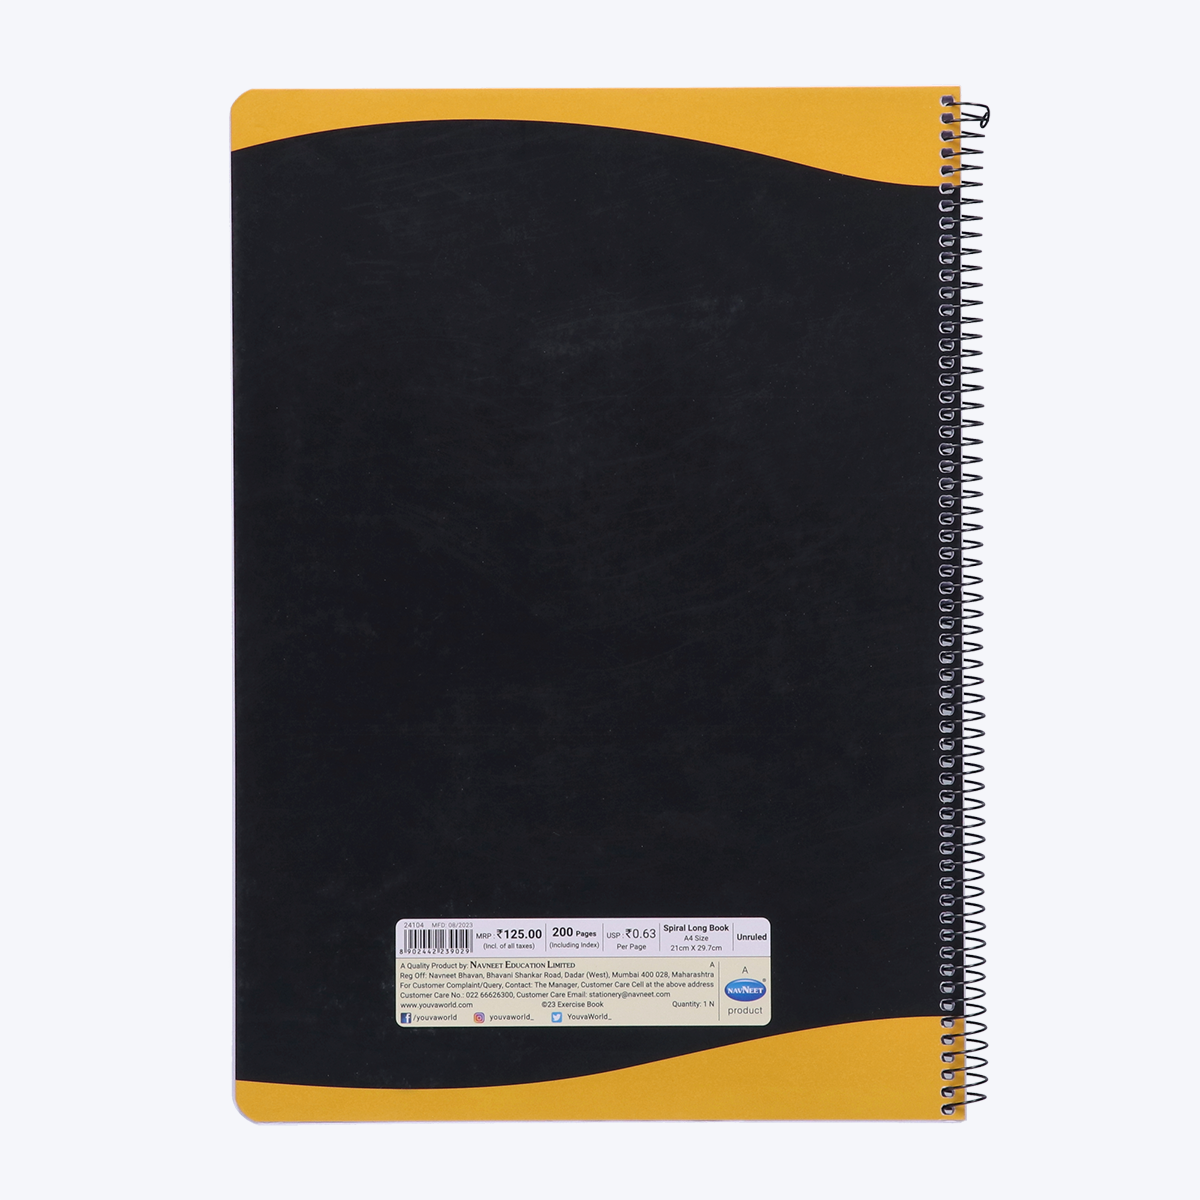 Navneet Youva | Spiral Long Book for students and executives | Spiral Bound with safety lock | A4 size - 21 x 29.7 cm | Unruled / No lines | 200 Pages | Pack of 1